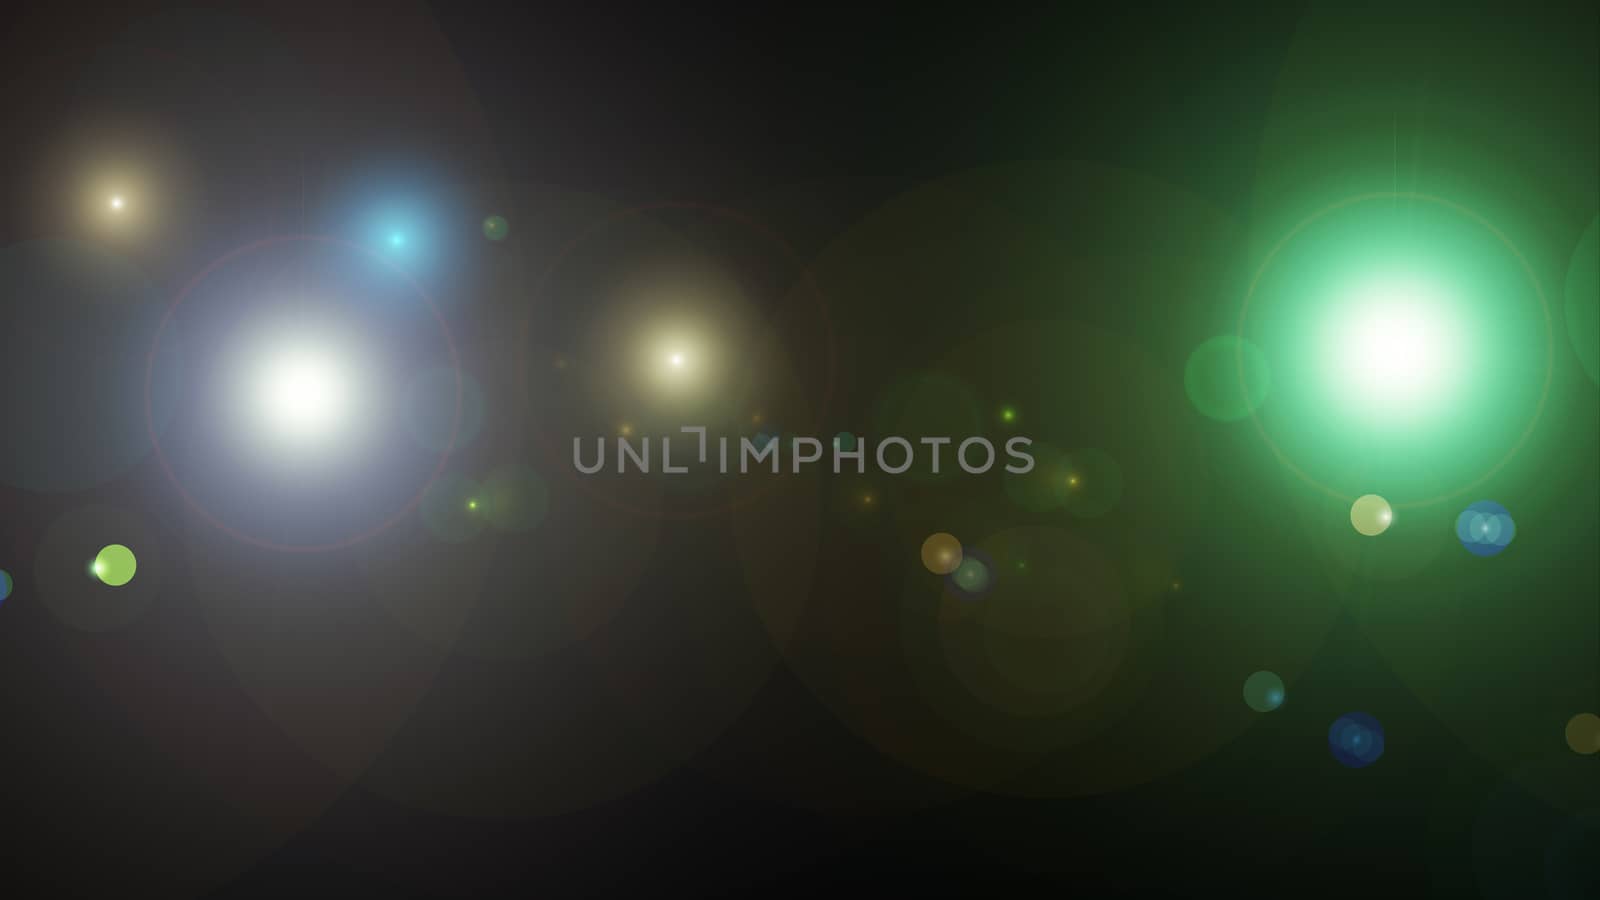 flash light lens ray flare abstract background